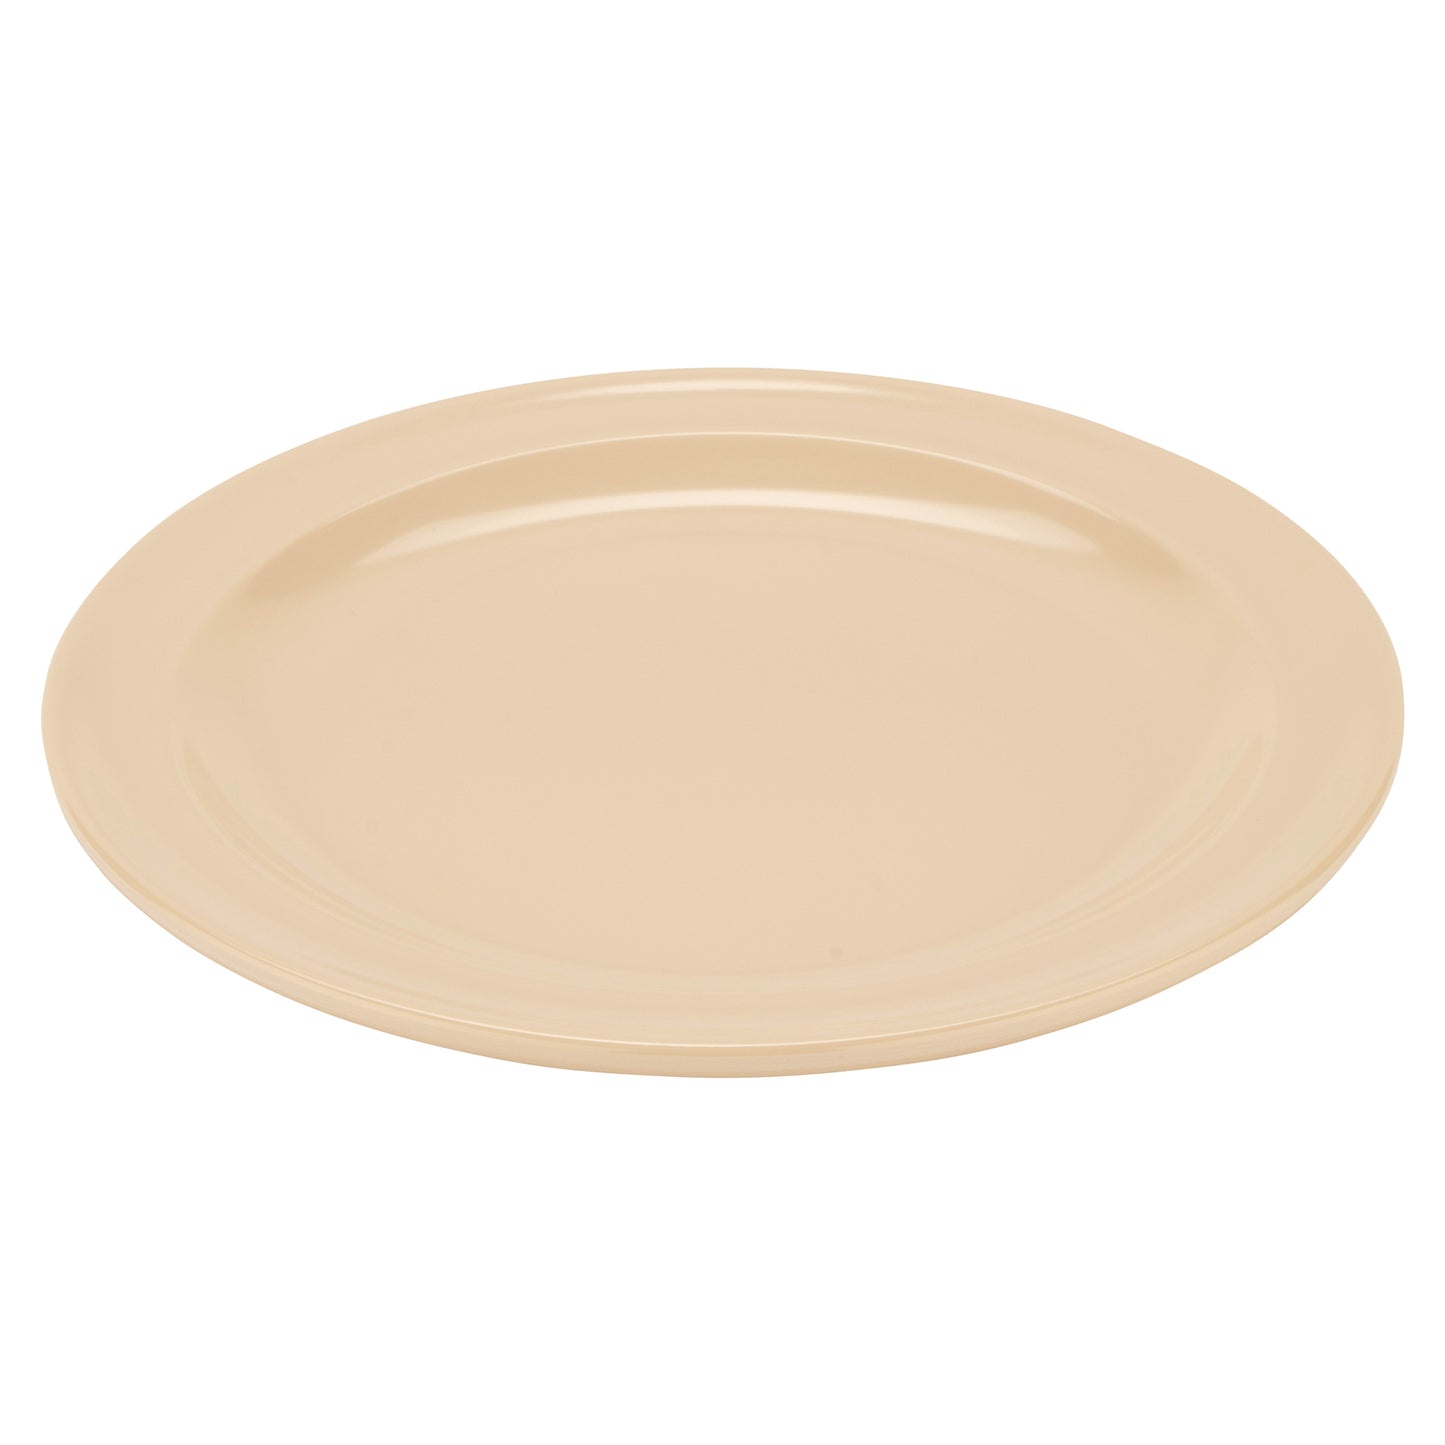 8" Round Plate (12 Pack)